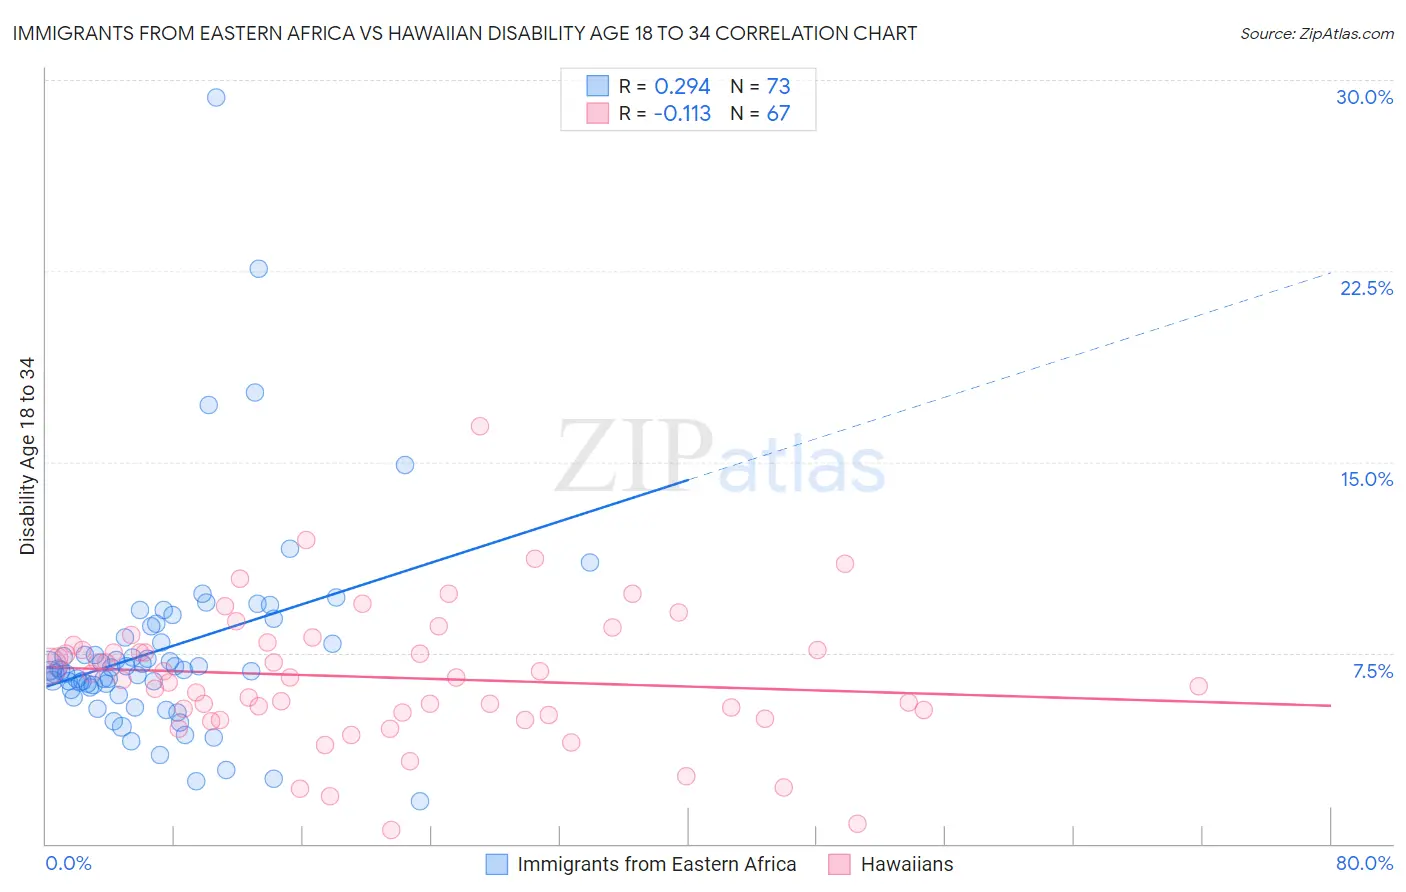 Immigrants from Eastern Africa vs Hawaiian Disability Age 18 to 34